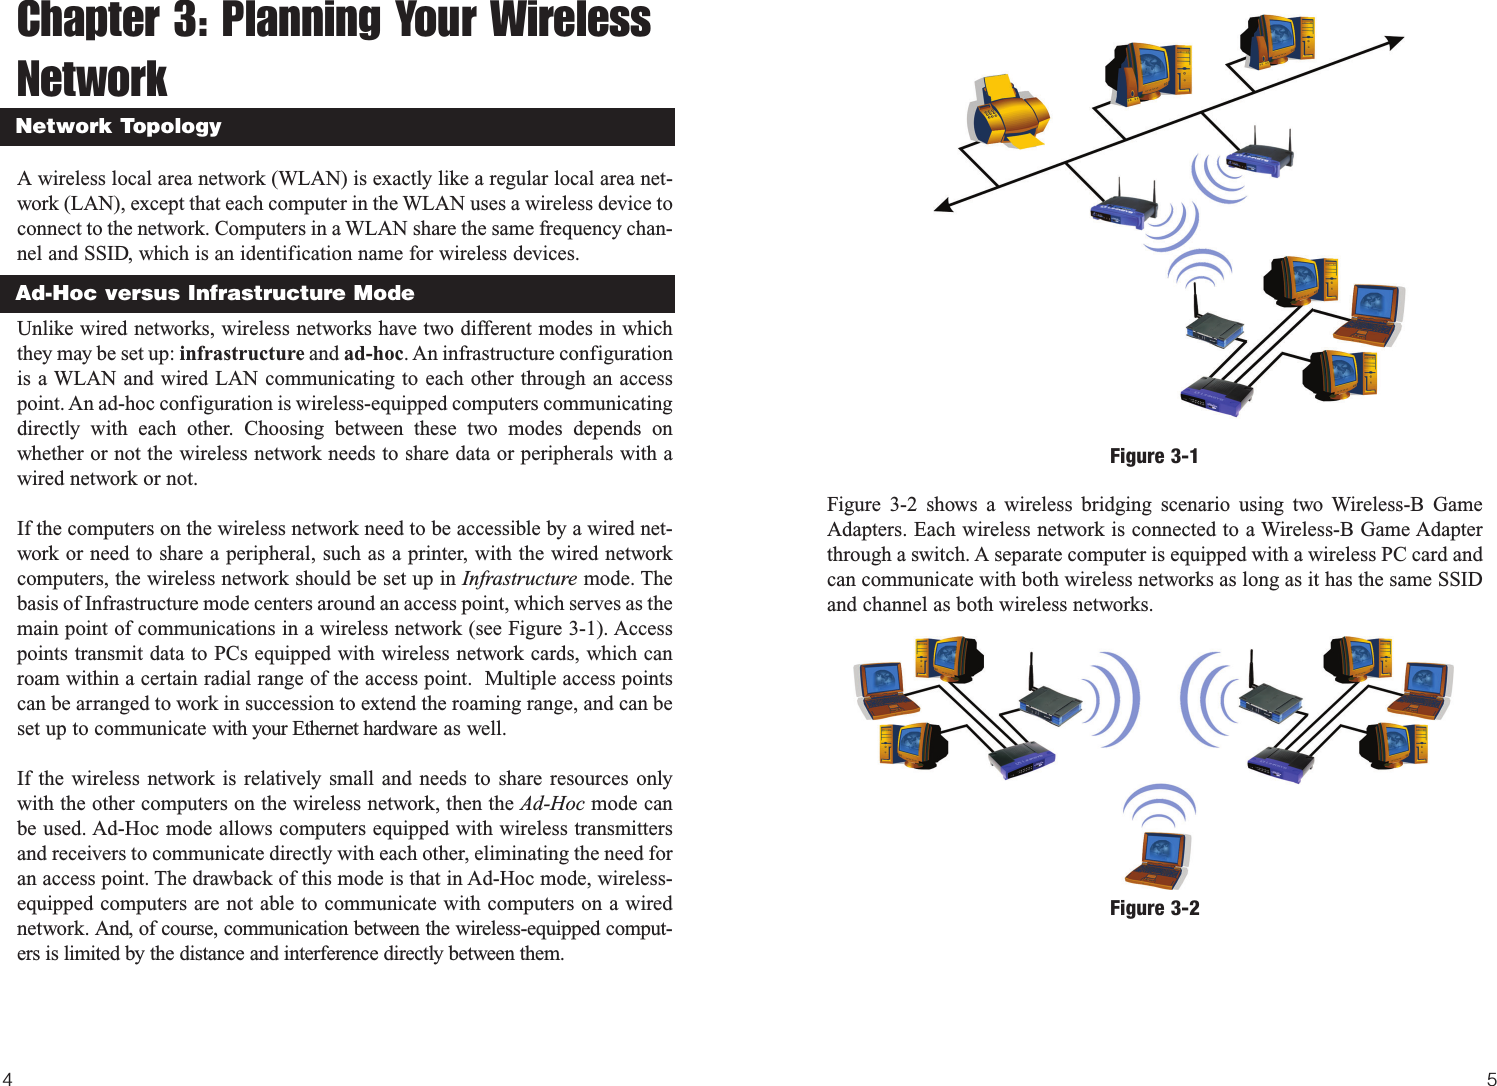 54Figure 3-2 shows a wireless bridging scenario using two Wireless-B GameAdapters. Each wireless network is connected to a Wireless-B Game Adapterthrough a switch. A separate computer is equipped with a wireless PC card andcan communicate with both wireless networks as long as it has the same SSIDand channel as both wireless networks.Chapter 3: Planning Your WirelessNetworkA wireless local area network (WLAN) is exactly like a regular local area net-work (LAN), except that each computer in the WLAN uses a wireless device toconnect to the network. Computers in a WLAN share the same frequency chan-nel and SSID, which is an identification name for wireless devices.Unlike wired networks, wireless networks have two different modes in whichthey may be set up: infrastructure and ad-hoc. An infrastructure configurationis a WLAN and wired LAN communicating to each other through an accesspoint. An ad-hoc configuration is wireless-equipped computers communicatingdirectly with each other. Choosing between these two modes depends onwhether or not the wireless network needs to share data or peripherals with awired network or not. If the computers on the wireless network need to be accessible by a wired net-work or need to share a peripheral, such as a printer, with the wired networkcomputers, the wireless network should be set up in Infrastructure mode. Thebasis of Infrastructure mode centers around an access point, which serves as themain point of communications in a wireless network (see Figure 3-1). Accesspoints transmit data to PCs equipped with wireless network cards, which canroam within a certain radial range of the access point.  Multiple access pointscan be arranged to work in succession to extend the roaming range, and can beset up to communicate with your Ethernet hardware as well. If the wireless network is relatively small and needs to share resources onlywith the other computers on the wireless network, then the Ad-Hoc mode canbe used. Ad-Hoc mode allows computers equipped with wireless transmittersand receivers to communicate directly with each other, eliminating the need foran access point. The drawback of this mode is that in Ad-Hoc mode, wireless-equipped computers are not able to communicate with computers on a wirednetwork. And, of course, communication between the wireless-equipped comput-ers is limited by the distance and interference directly between them.Network TopologyAd-Hoc versus Infrastructure ModeFigure 3-1Figure 3-2